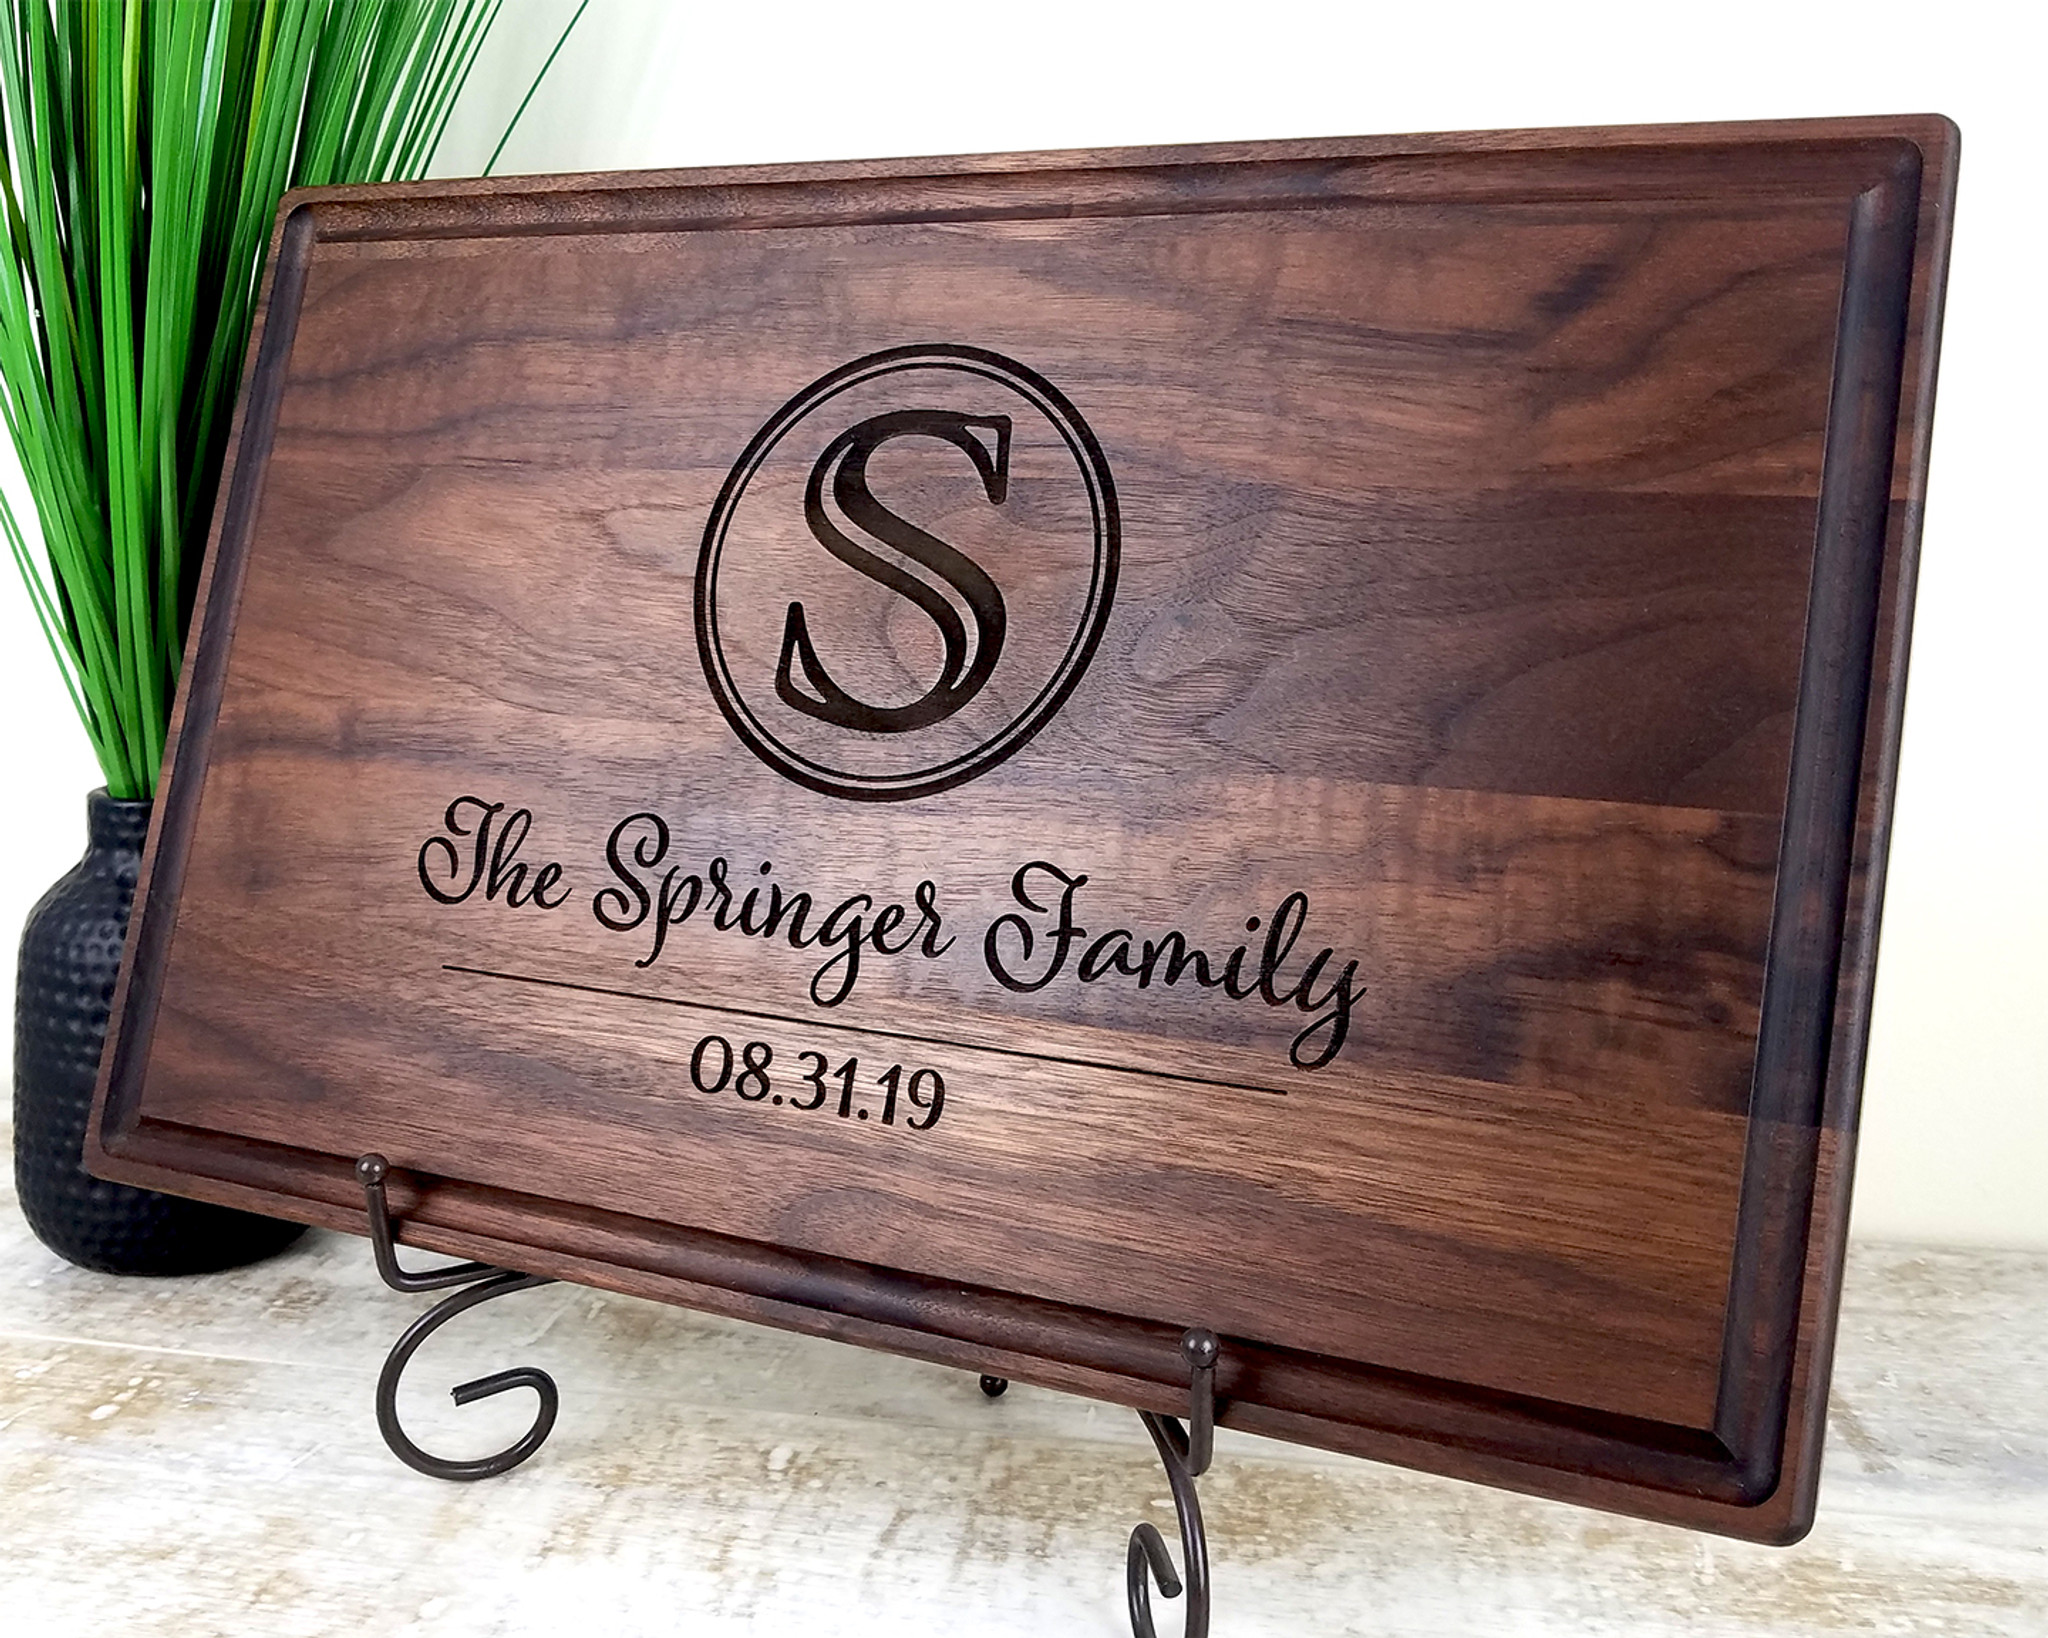 https://cdn11.bigcommerce.com/s-26585/images/stencil/2048x2048/products/317/1629/personalized_cutting_board_fort_worth_tx__18357.1583537965.jpg?c=2